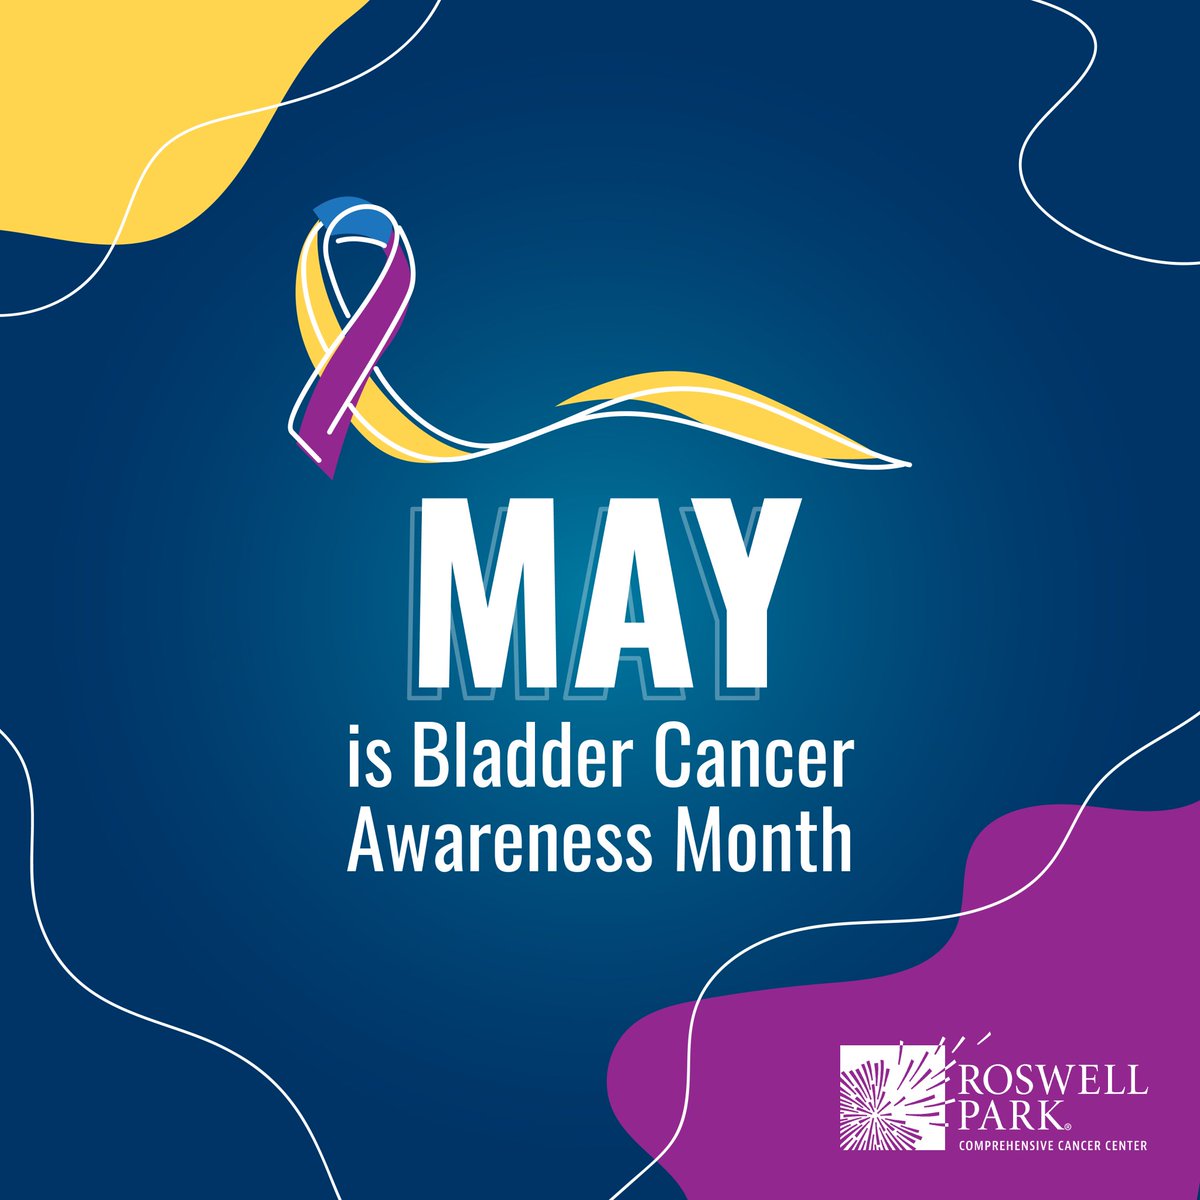 🟣🔵🟡 May is bladder cancer awareness month! 🟣🔵🟡 Every day in the Woloszynska Lab at @RoswellPark , we strive to perform rigorous research towards the treatment and cure of bladder cancer. 💜💛💙